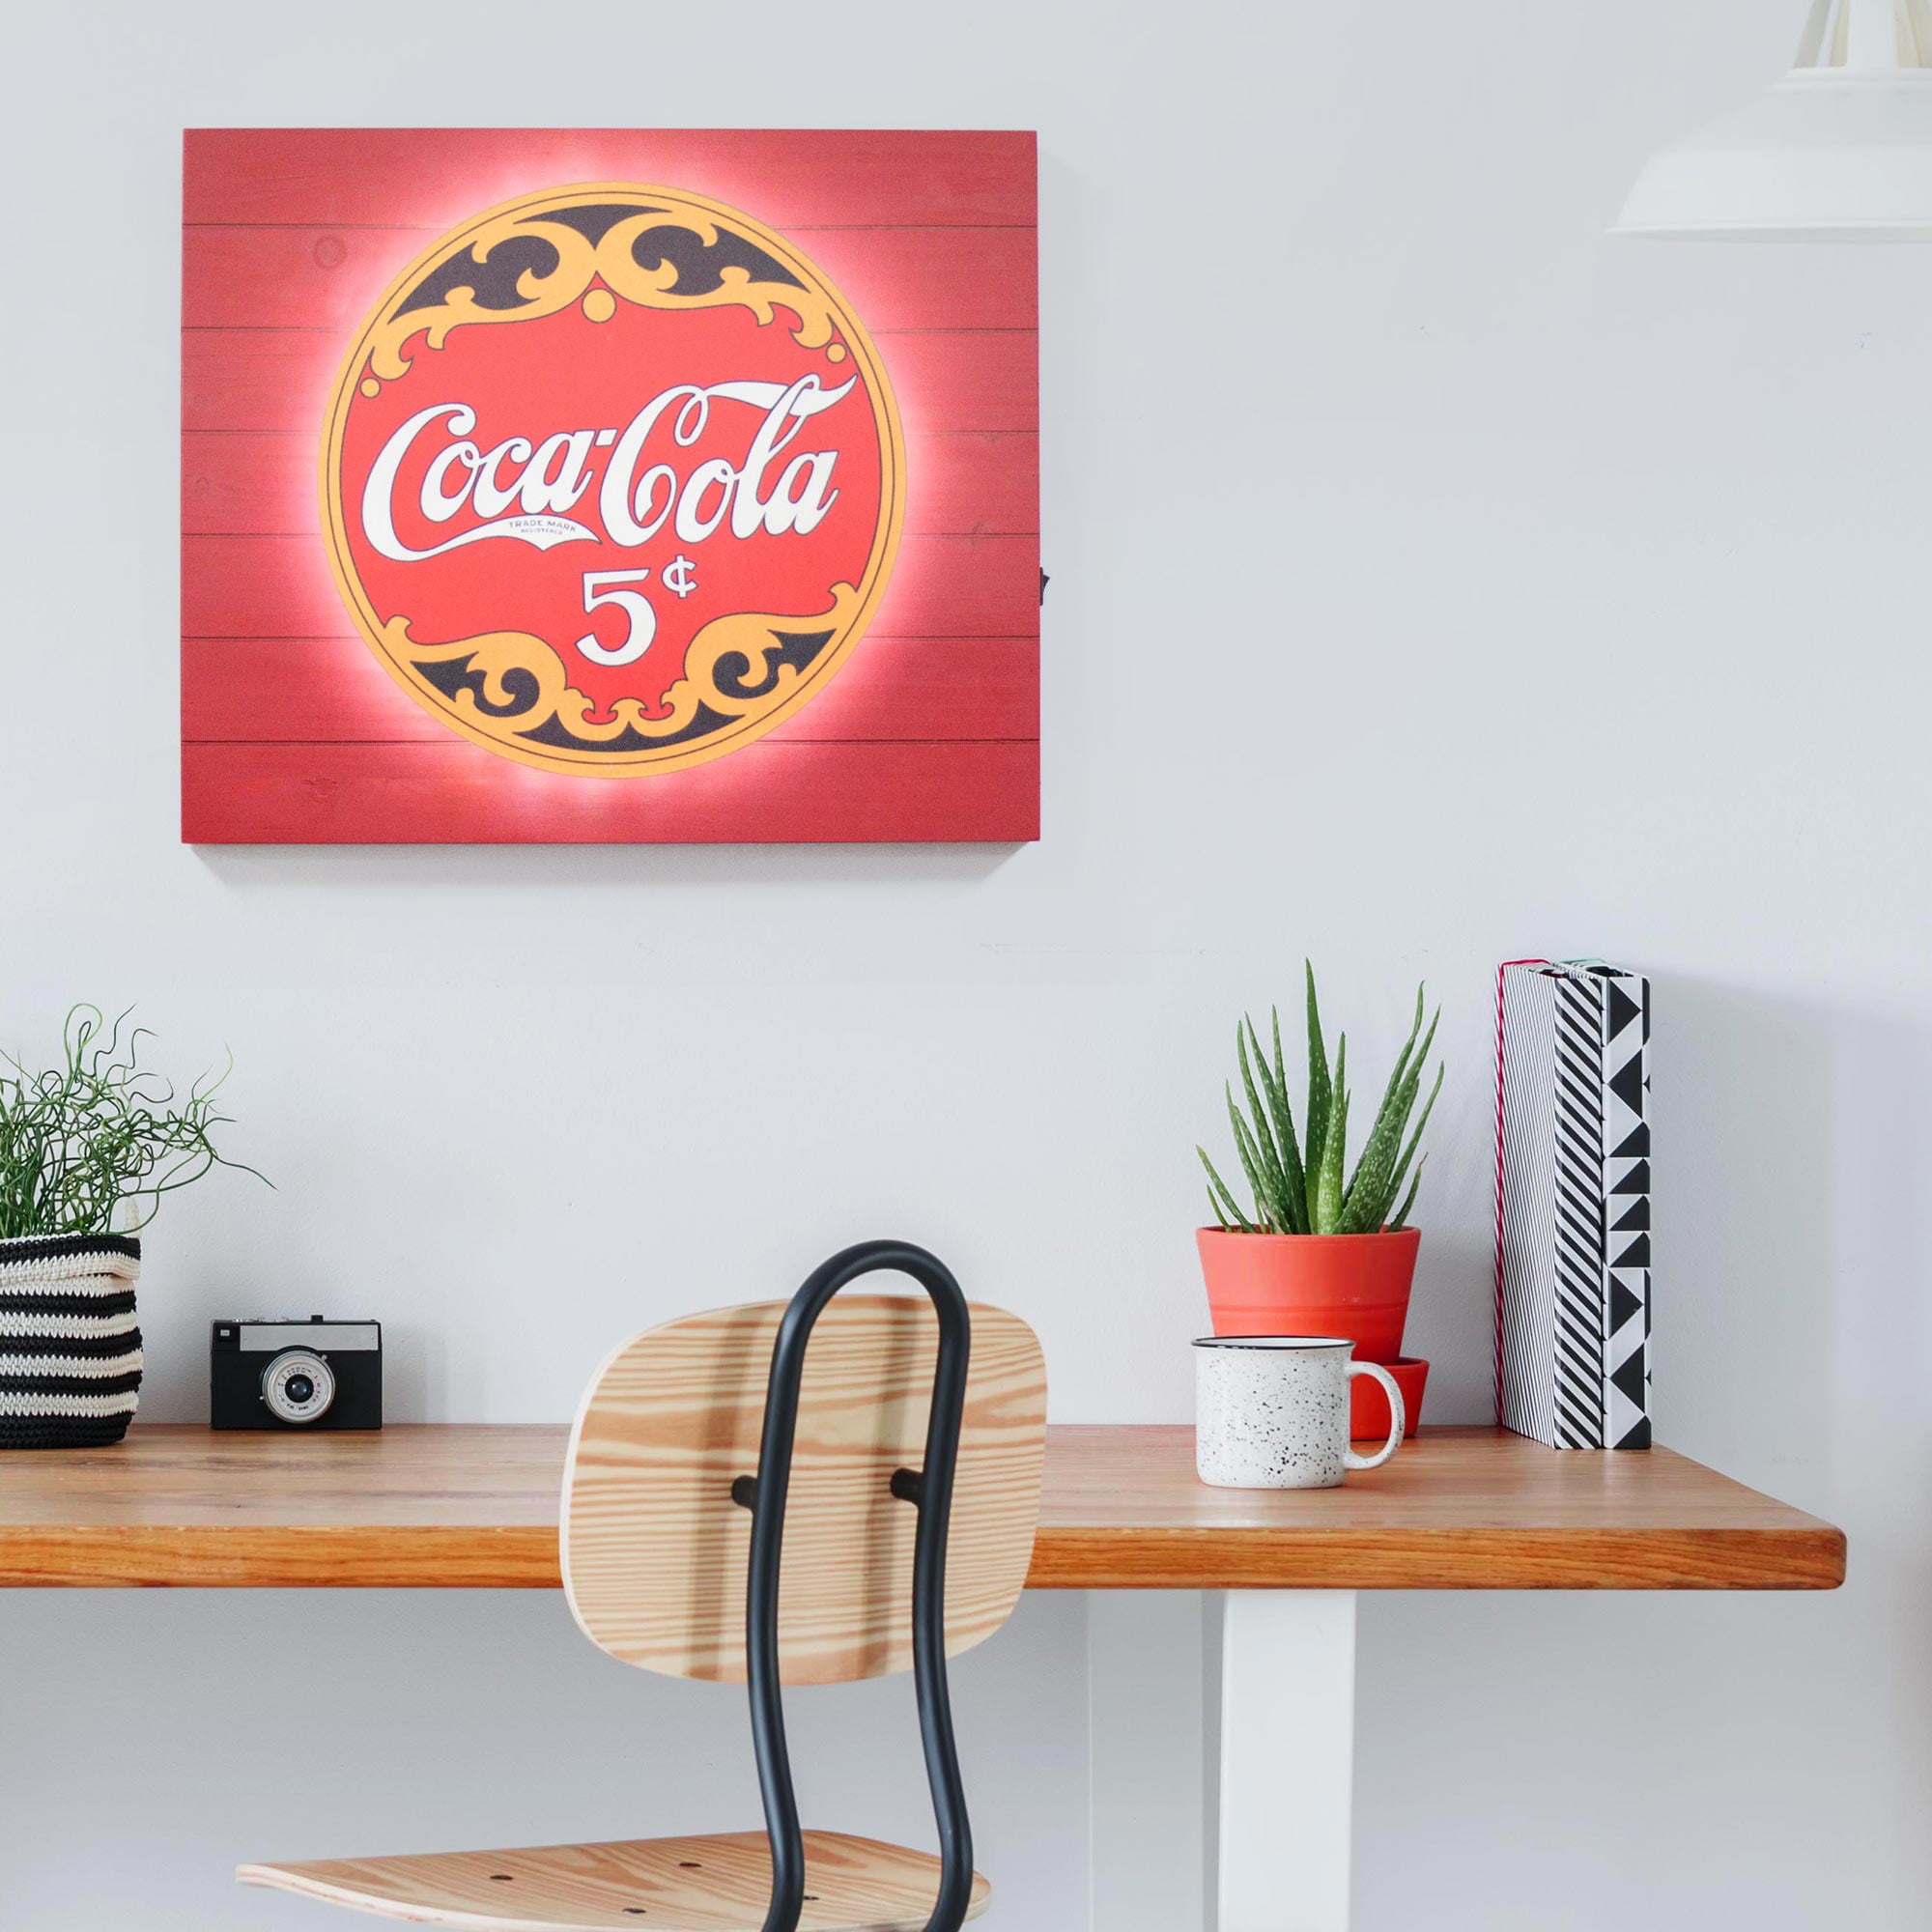 Coca-Cola Classic Red Button Disc Wall Decal Vintage Style Kitchen 